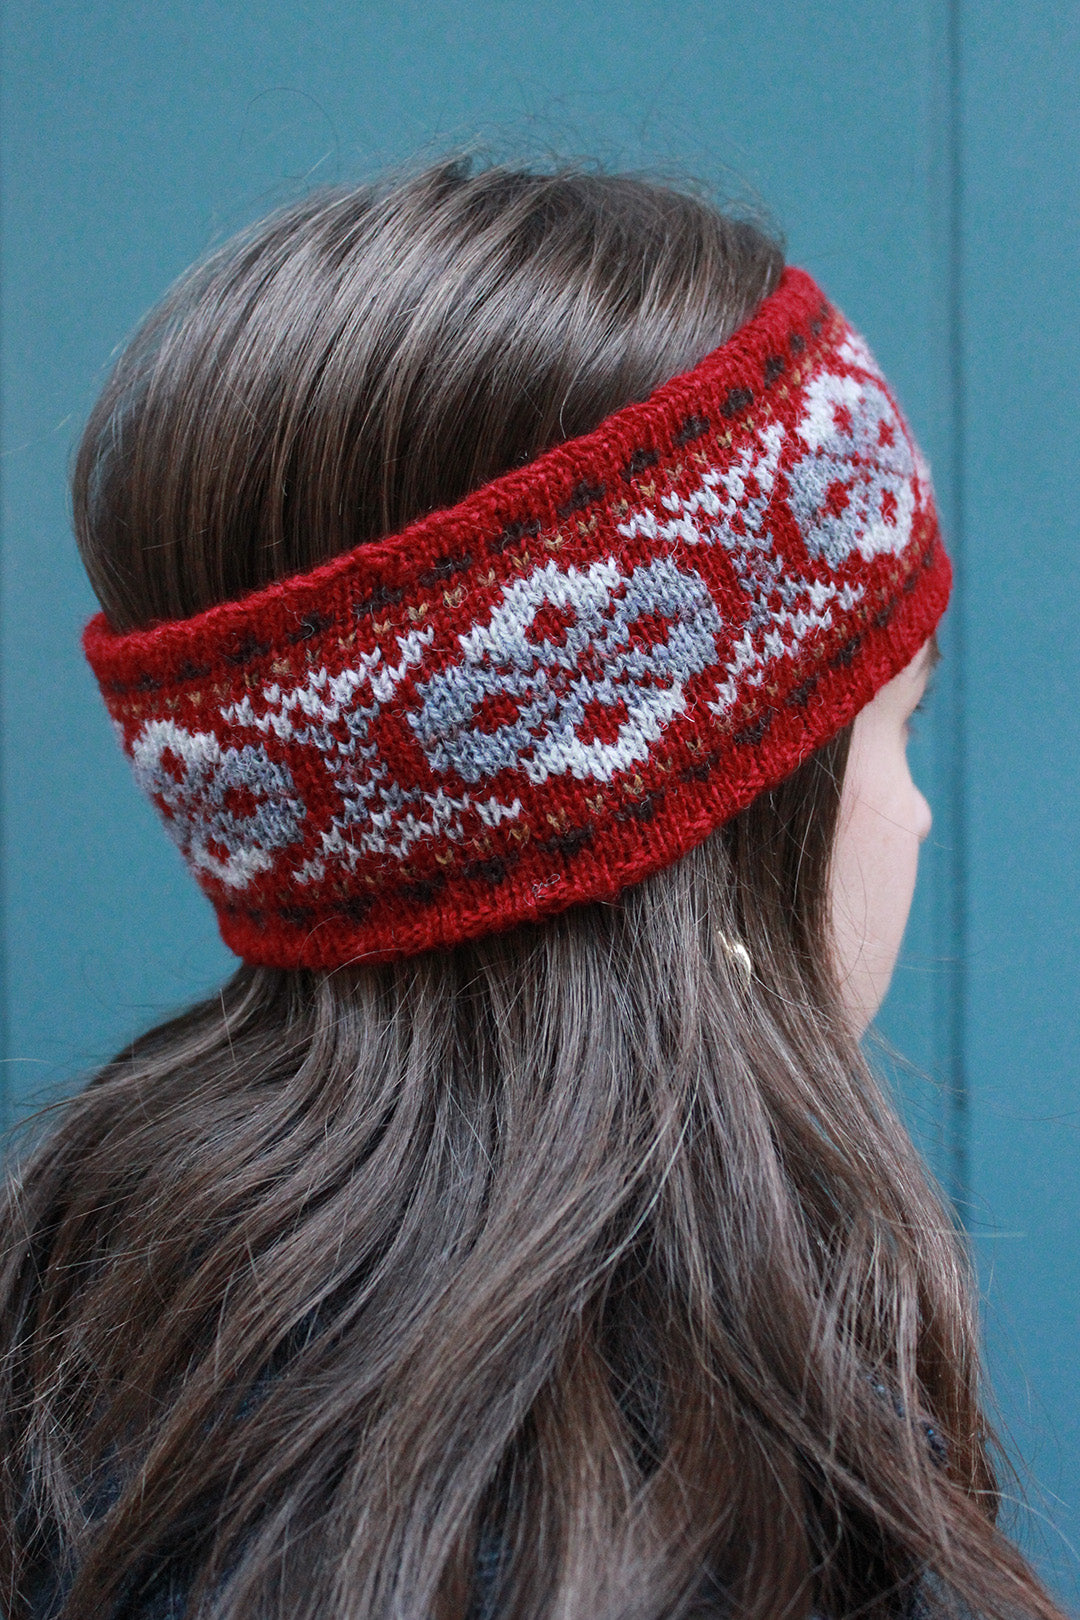 Hand knitted Fair Isle headband in shades of red, made exclusively for the Scottish Textiles Showcase.